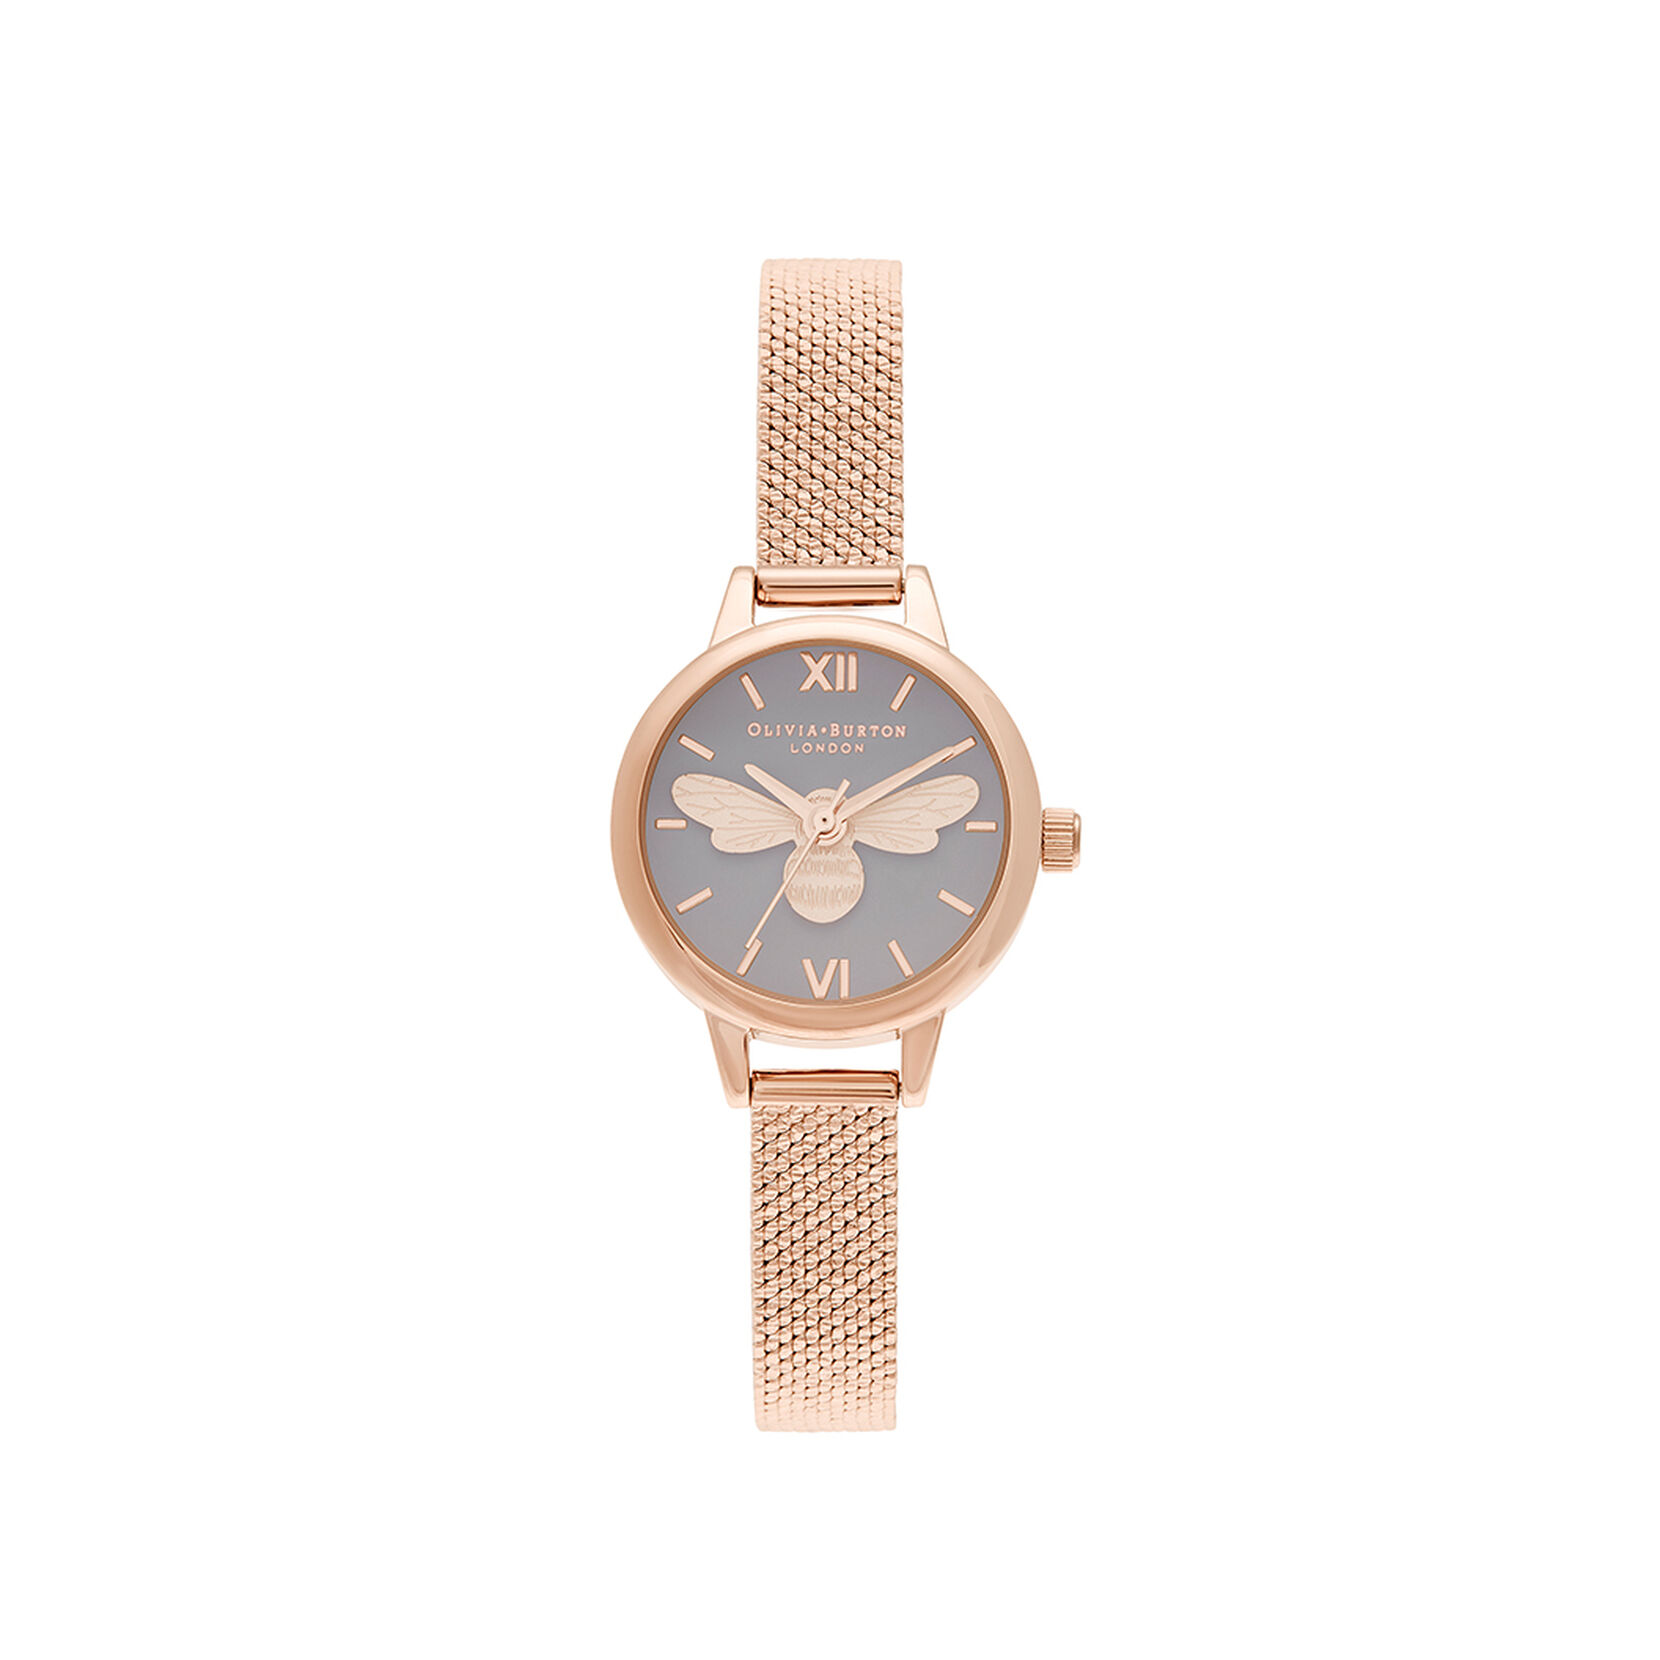 You Have My Heart Rose Gold Watch & Bracelet Giftset